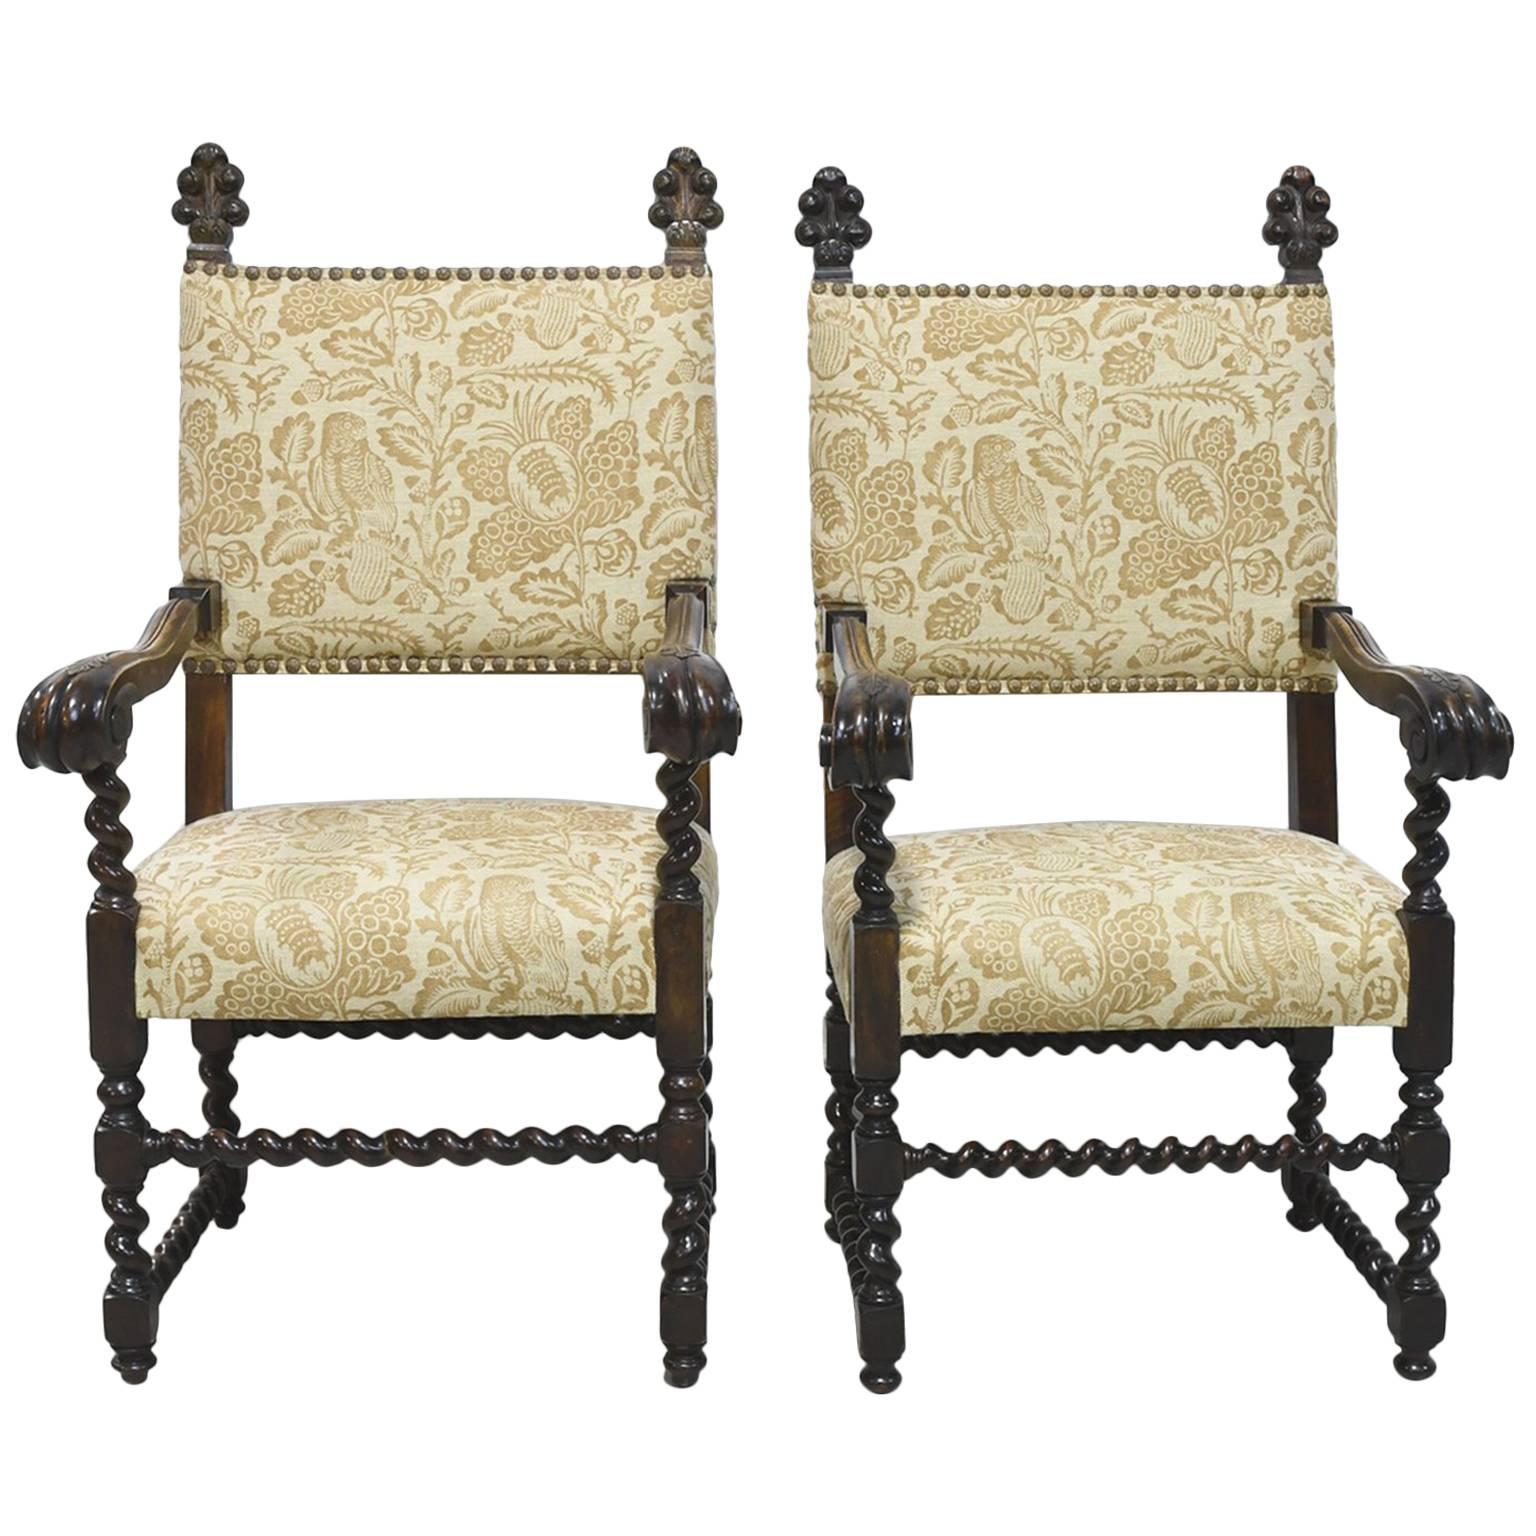 Pair of 19th Century Jacobean Style Throne Chairs with Carved Royal Plumes For Sale